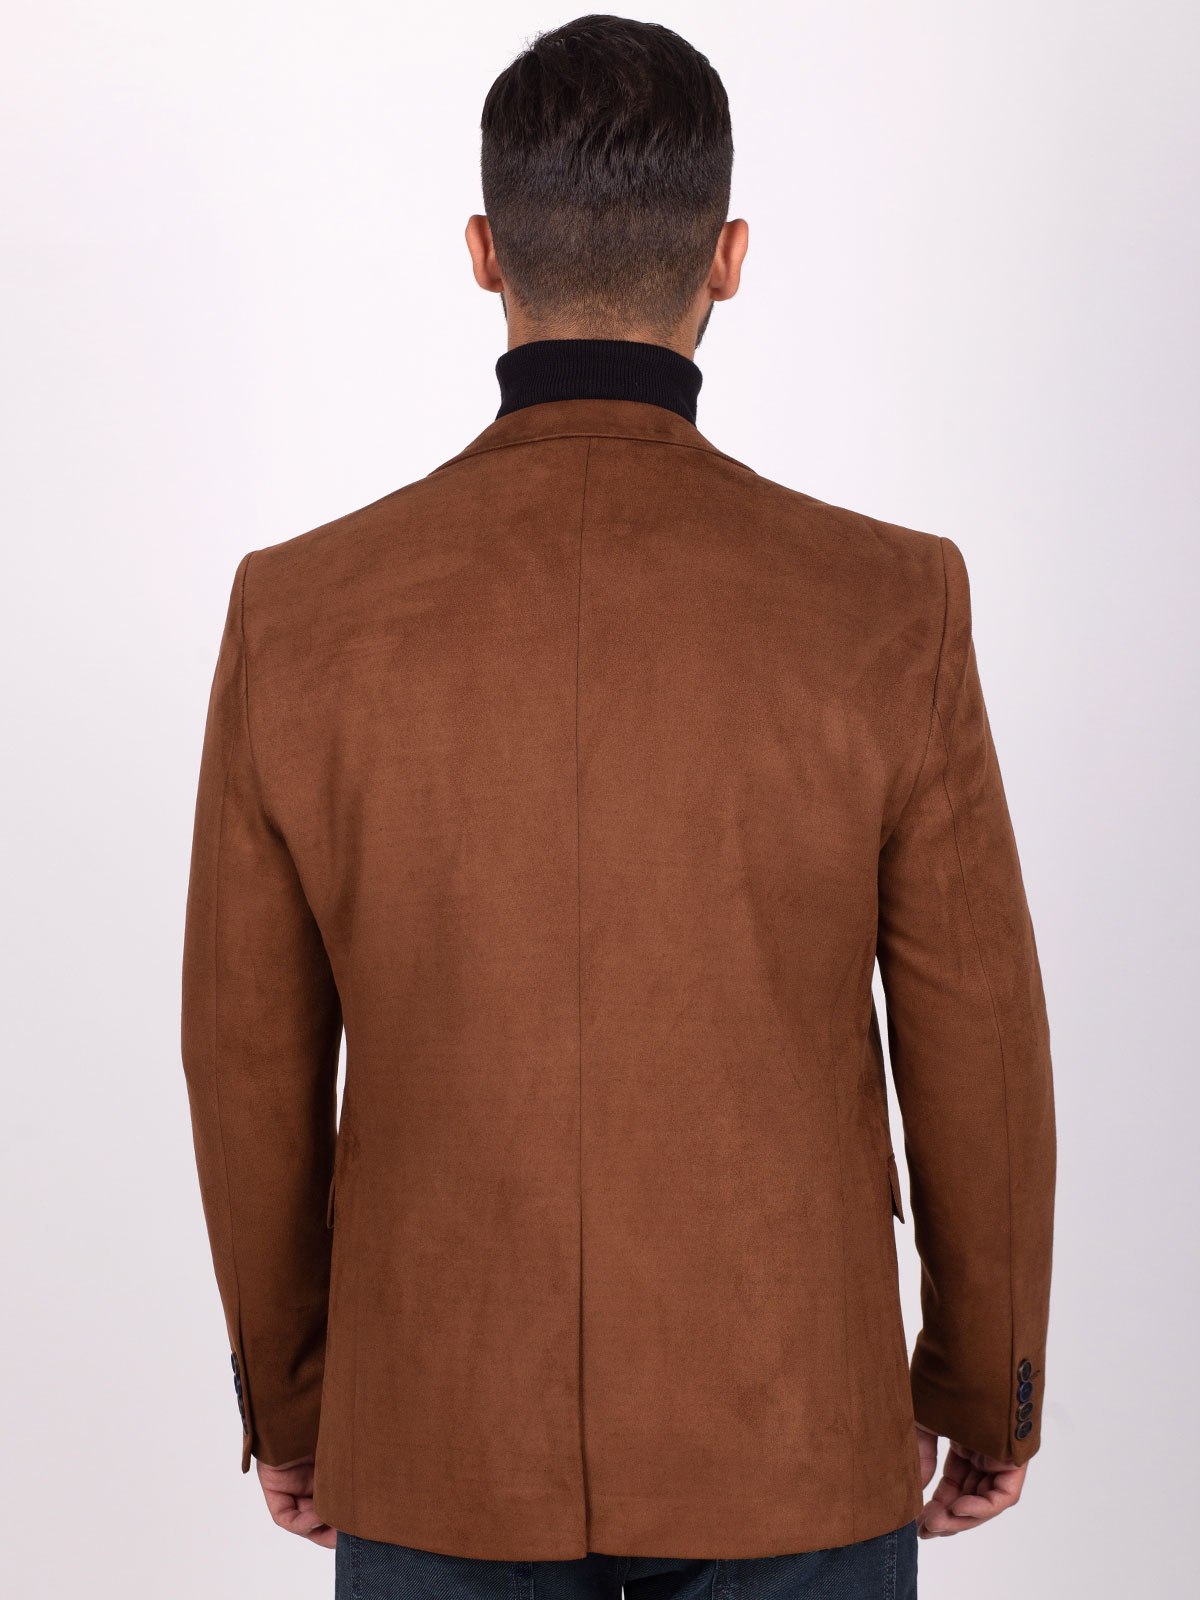 Fitted jacket in brown suede - 61084 € 72.55 img4